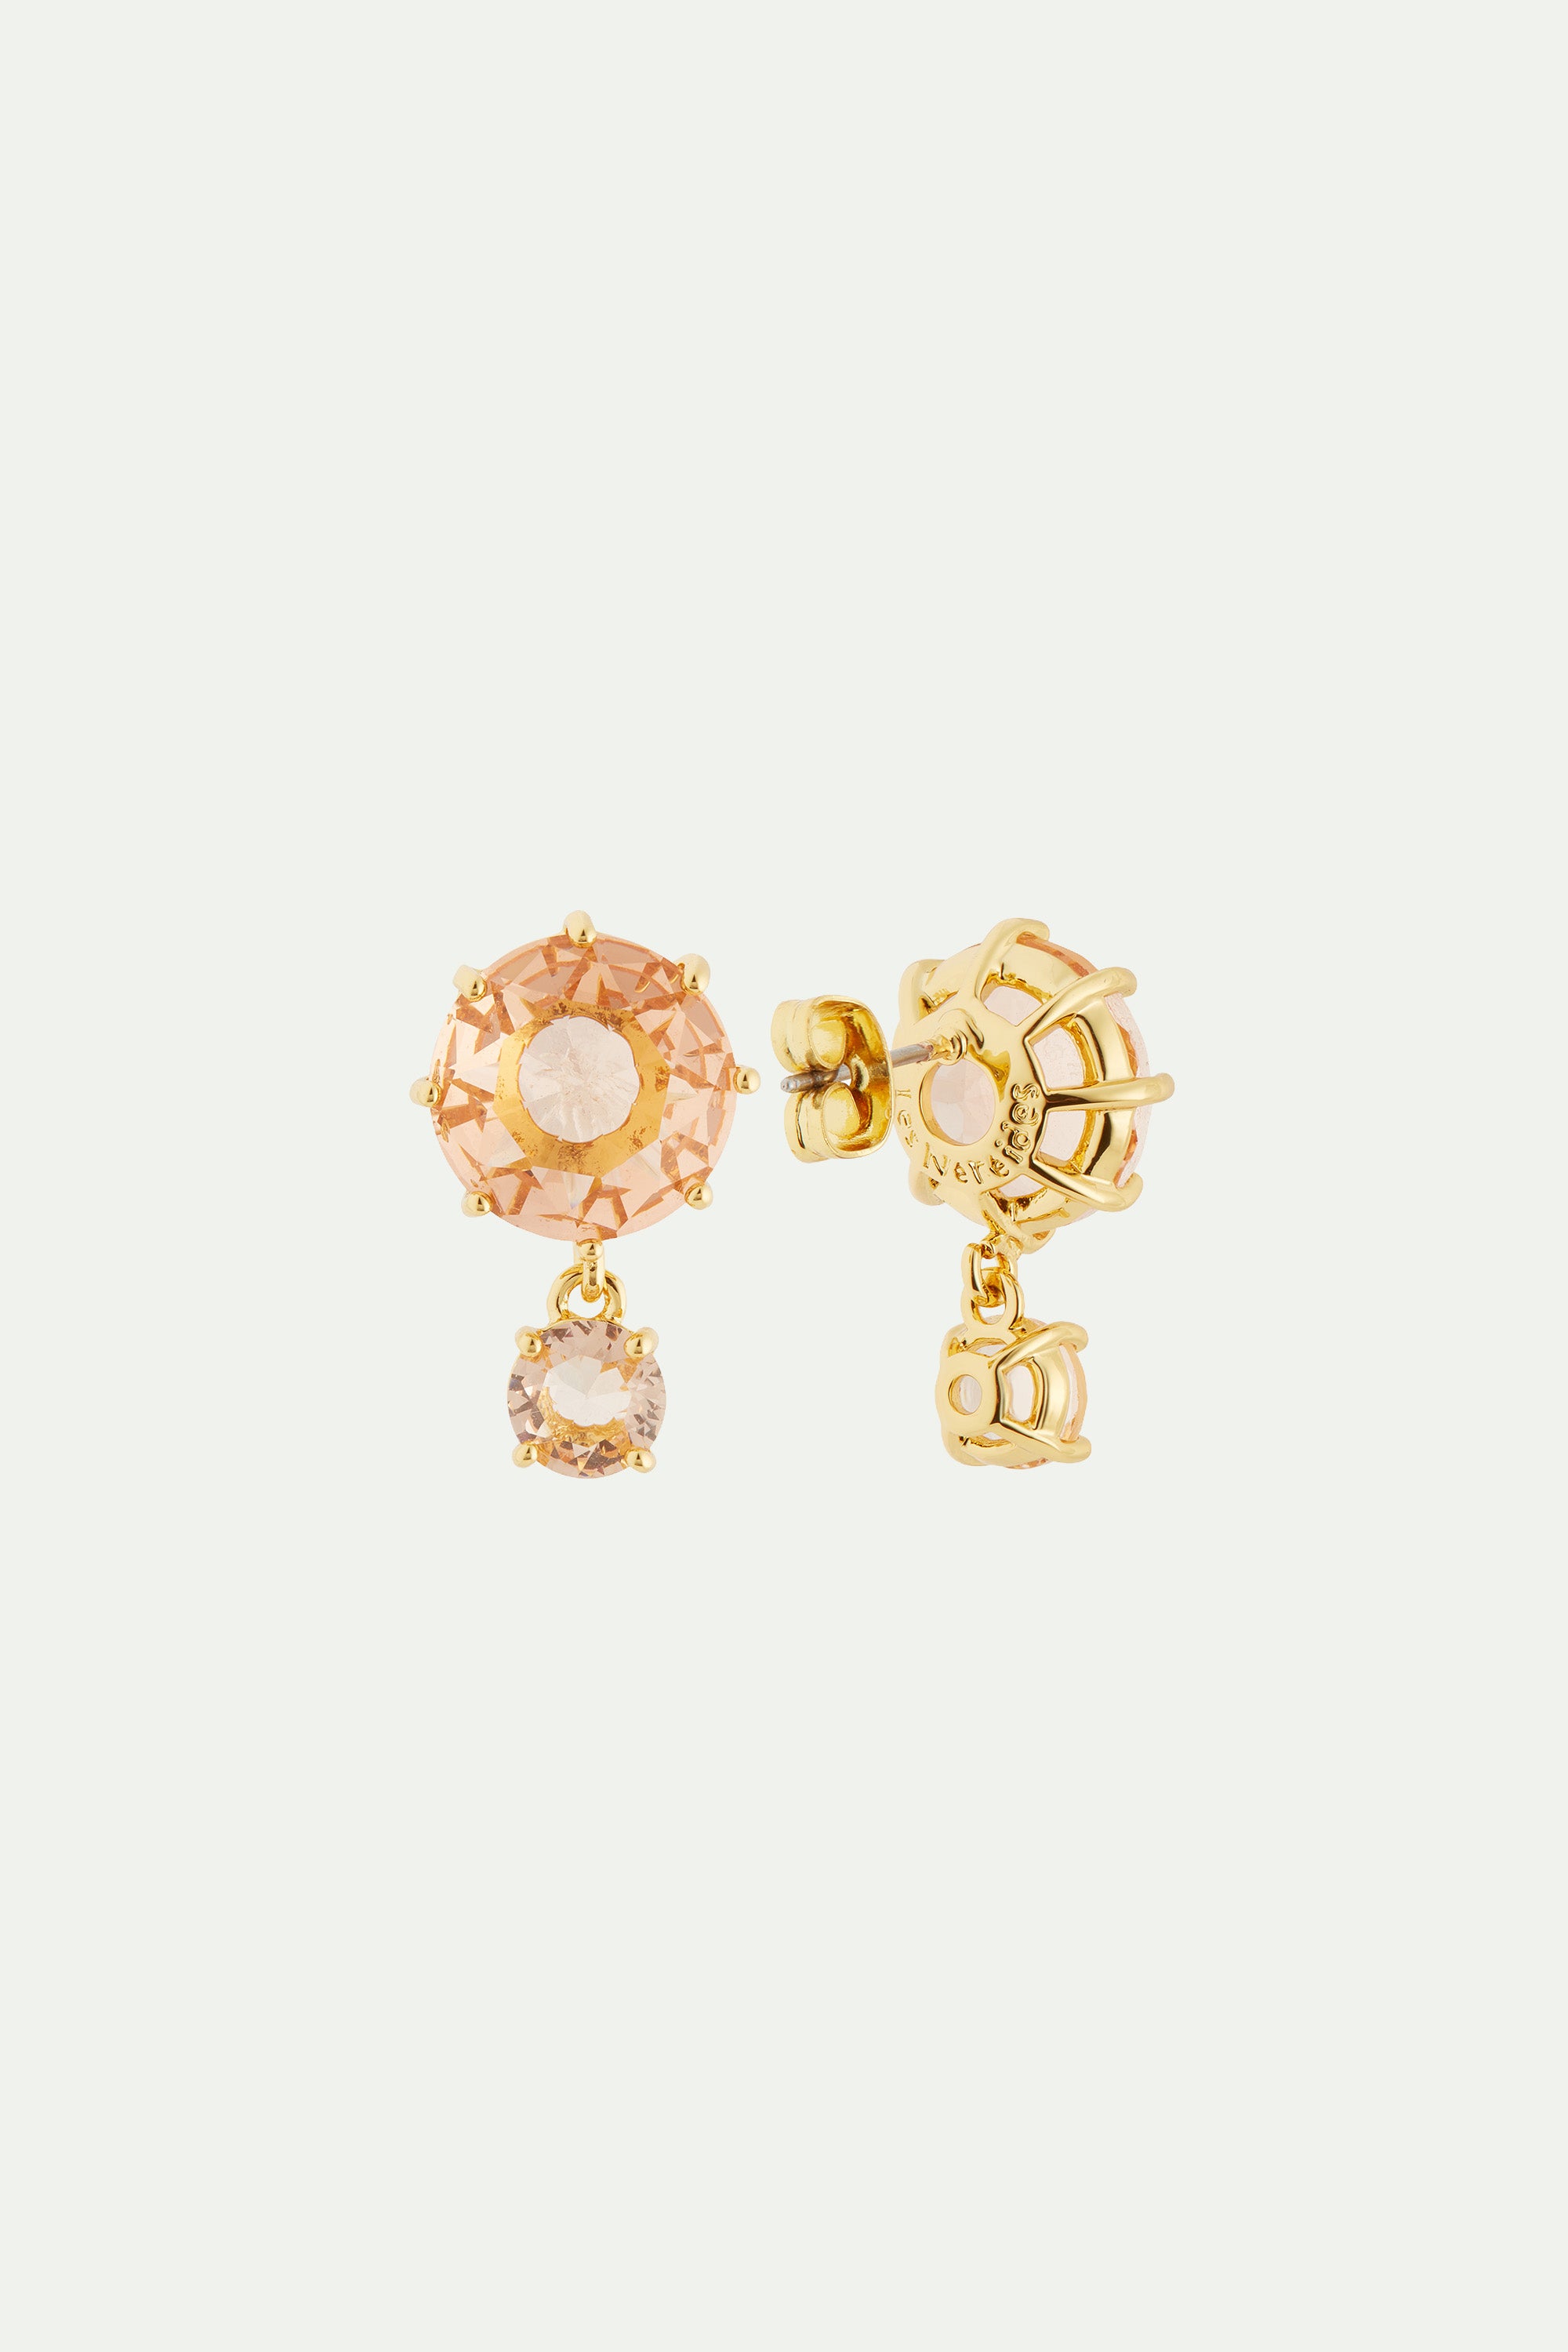 Apricot pink Diamantine 2 round stone post earrings